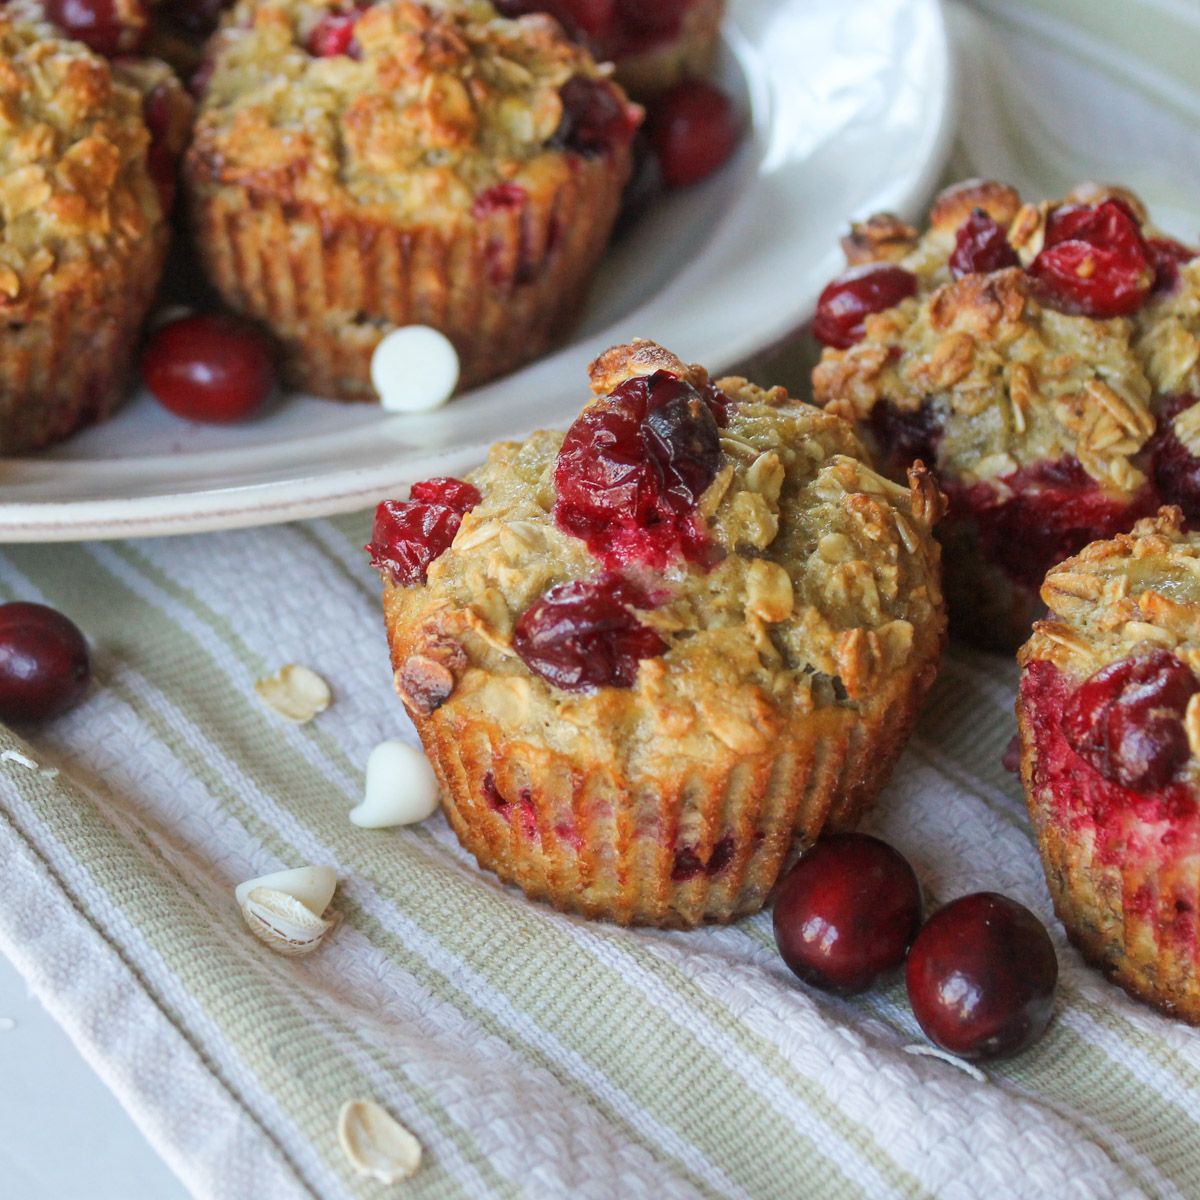 A few cranberry oatmeal cups on a towel in front of a white plate with more.